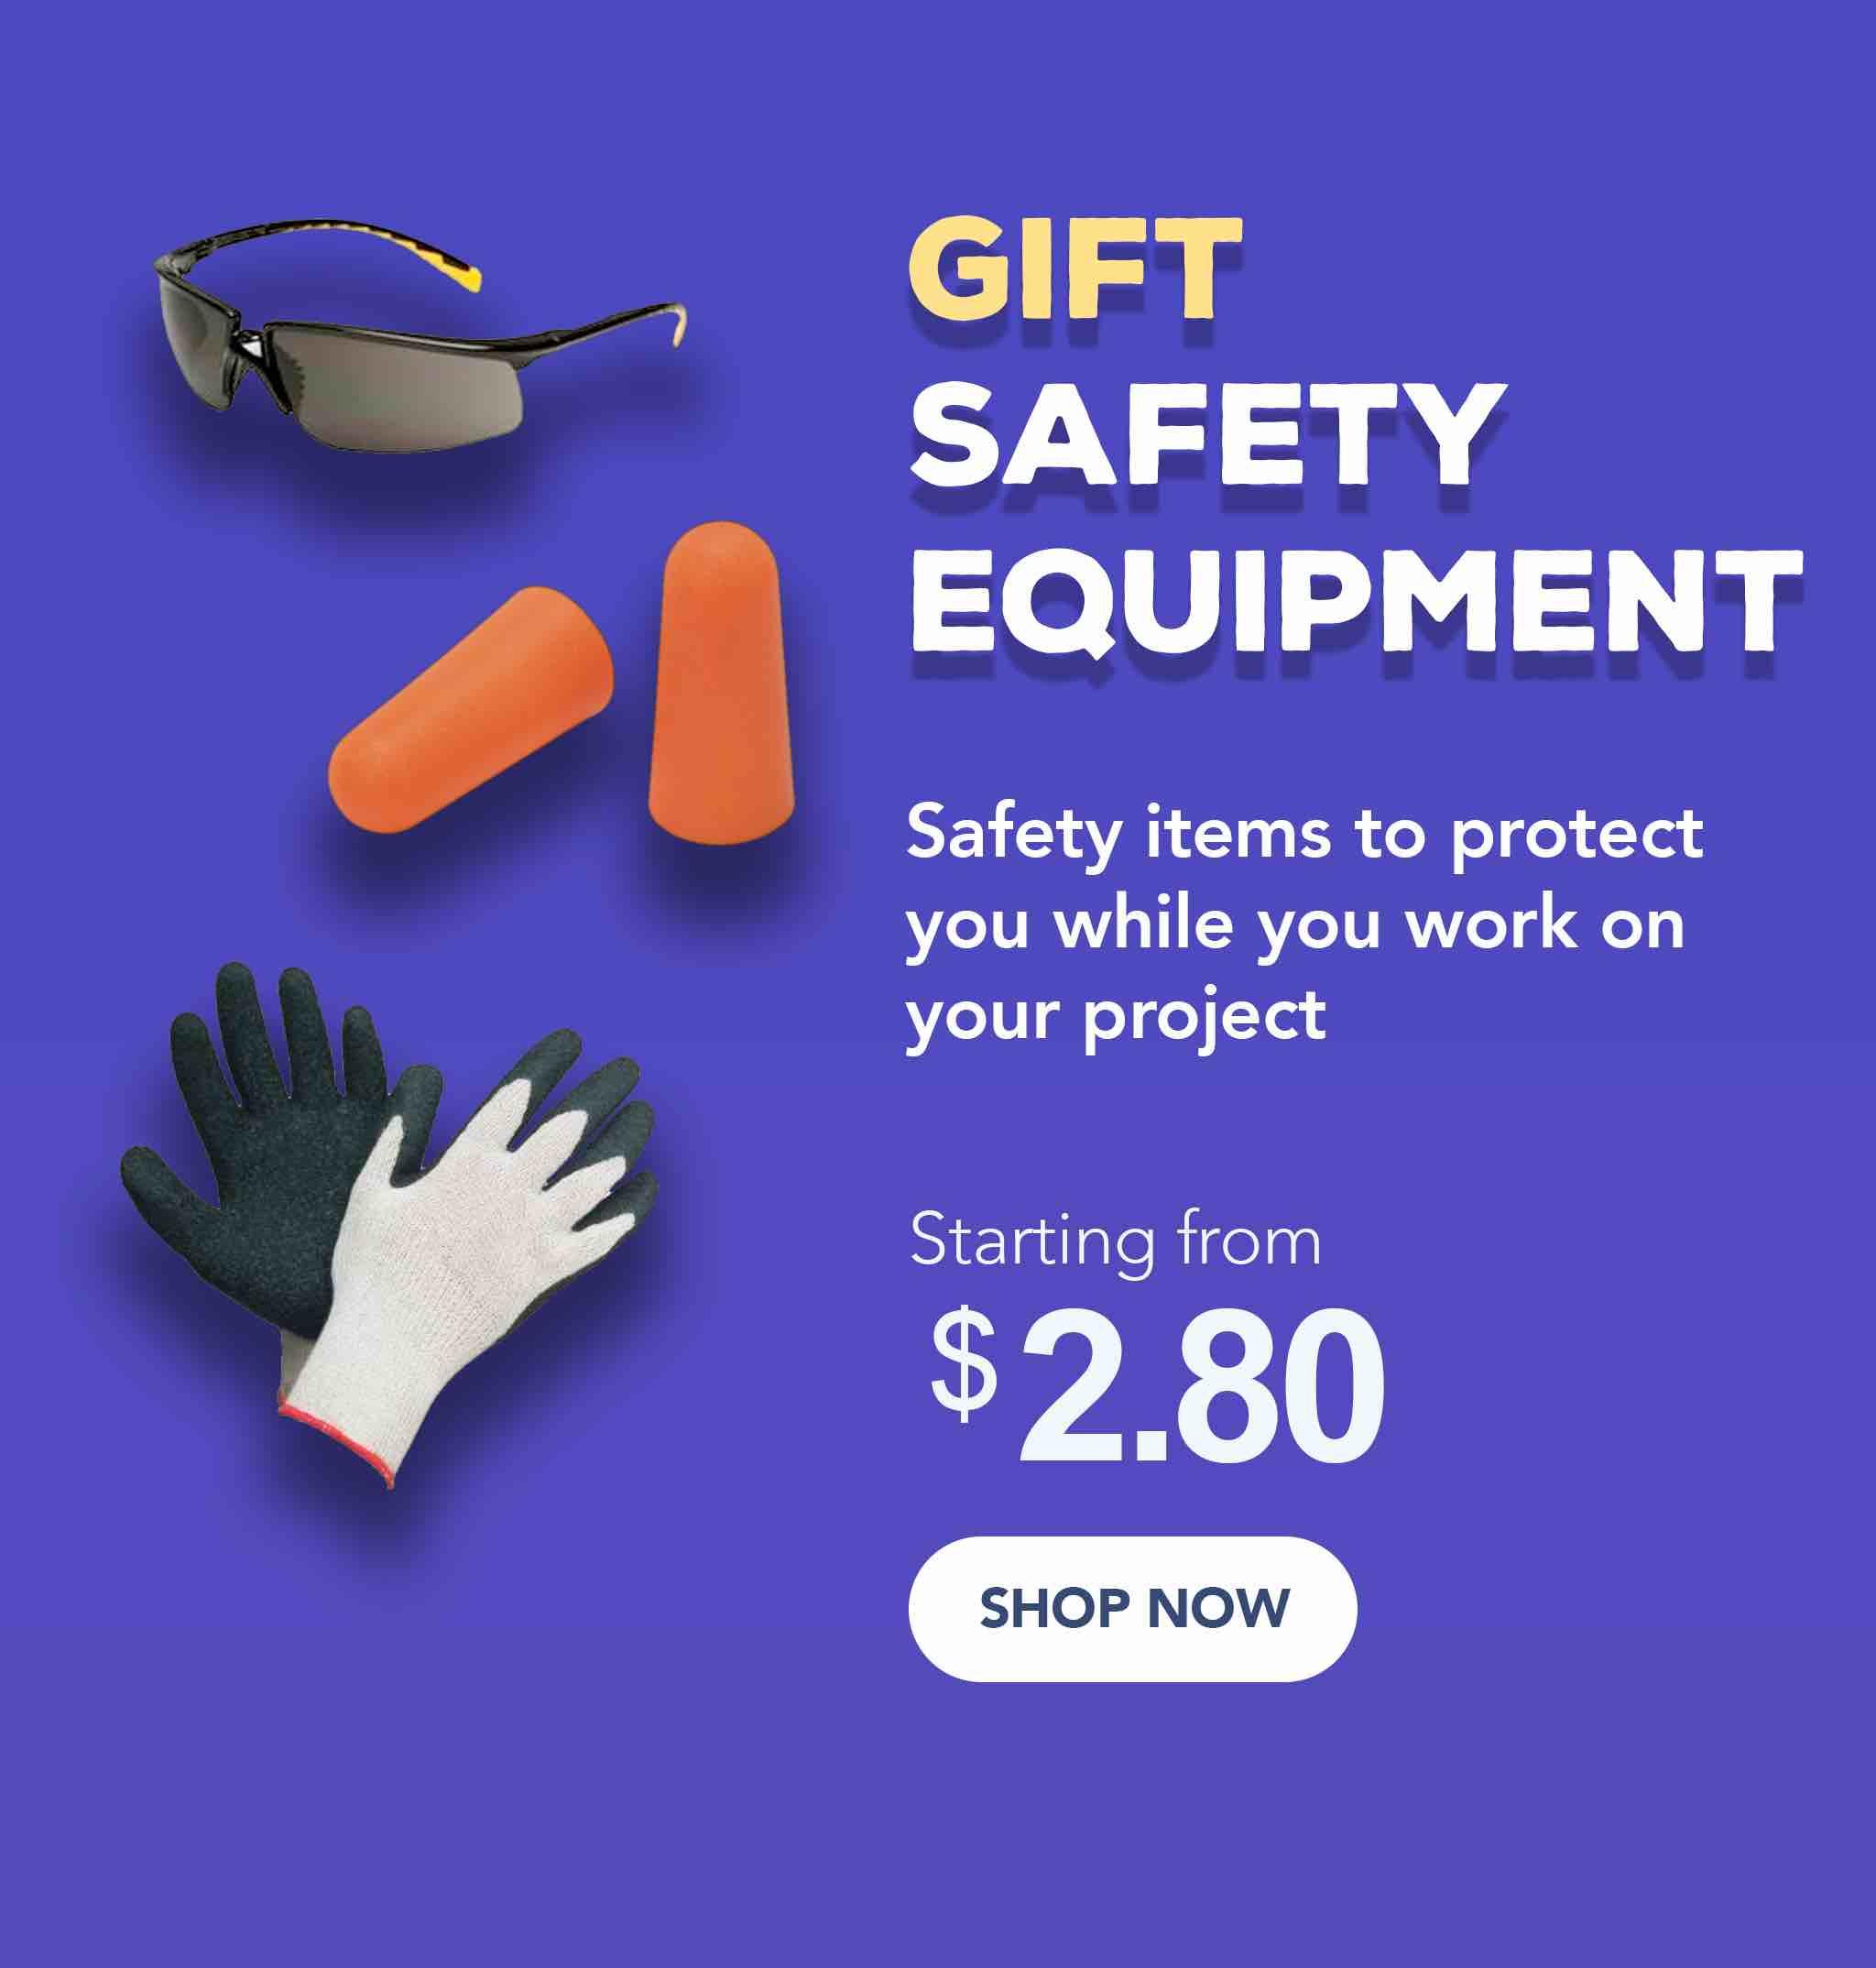 Safety items to protect you while you work on your project